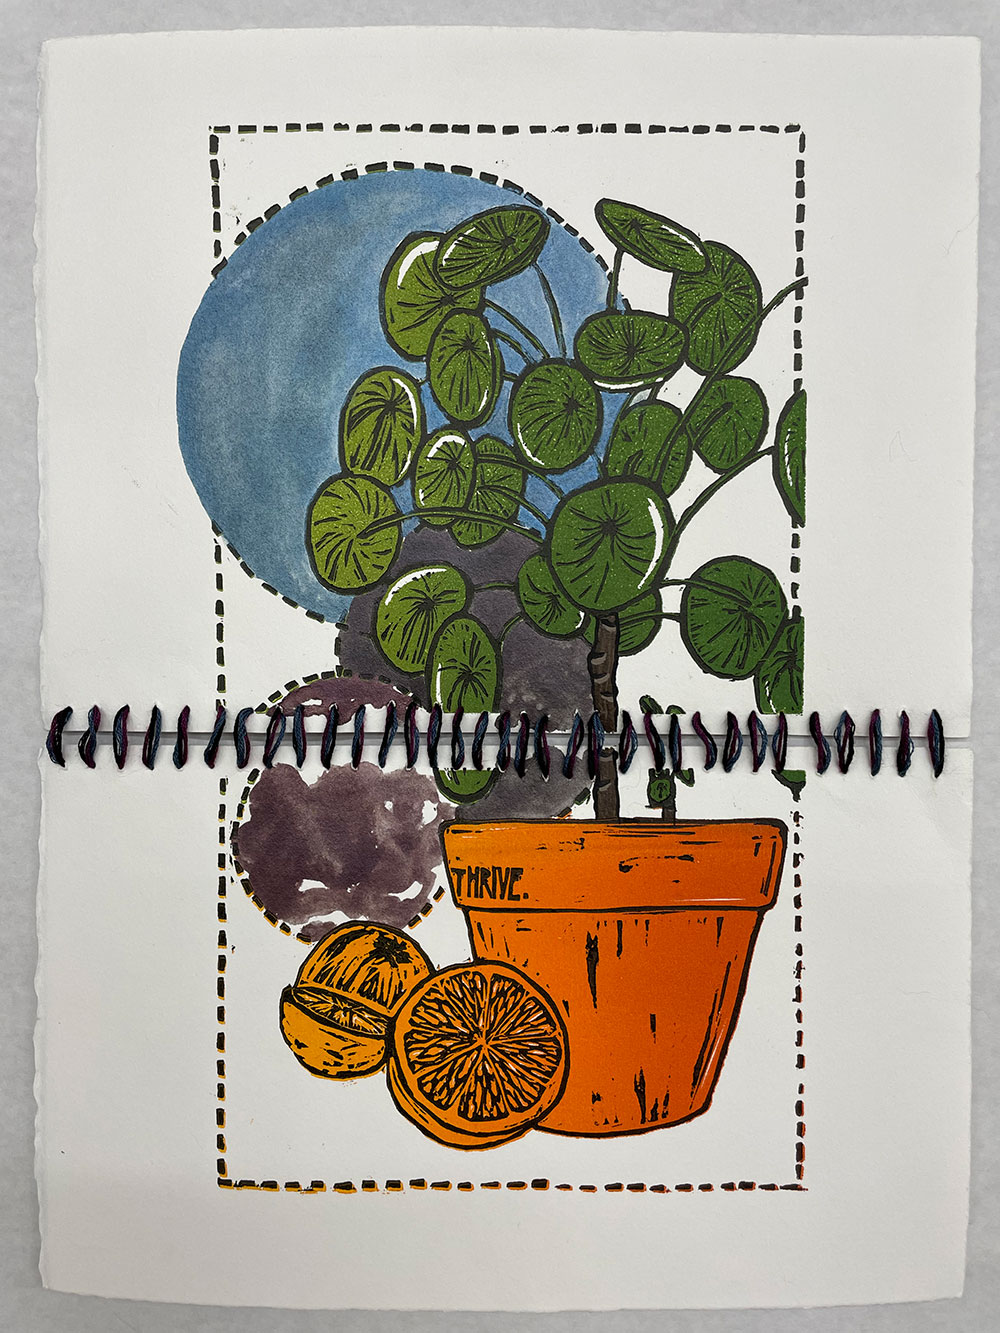 A colored printed image of a green plant planted into an orange bowl with oranges on the horizon line